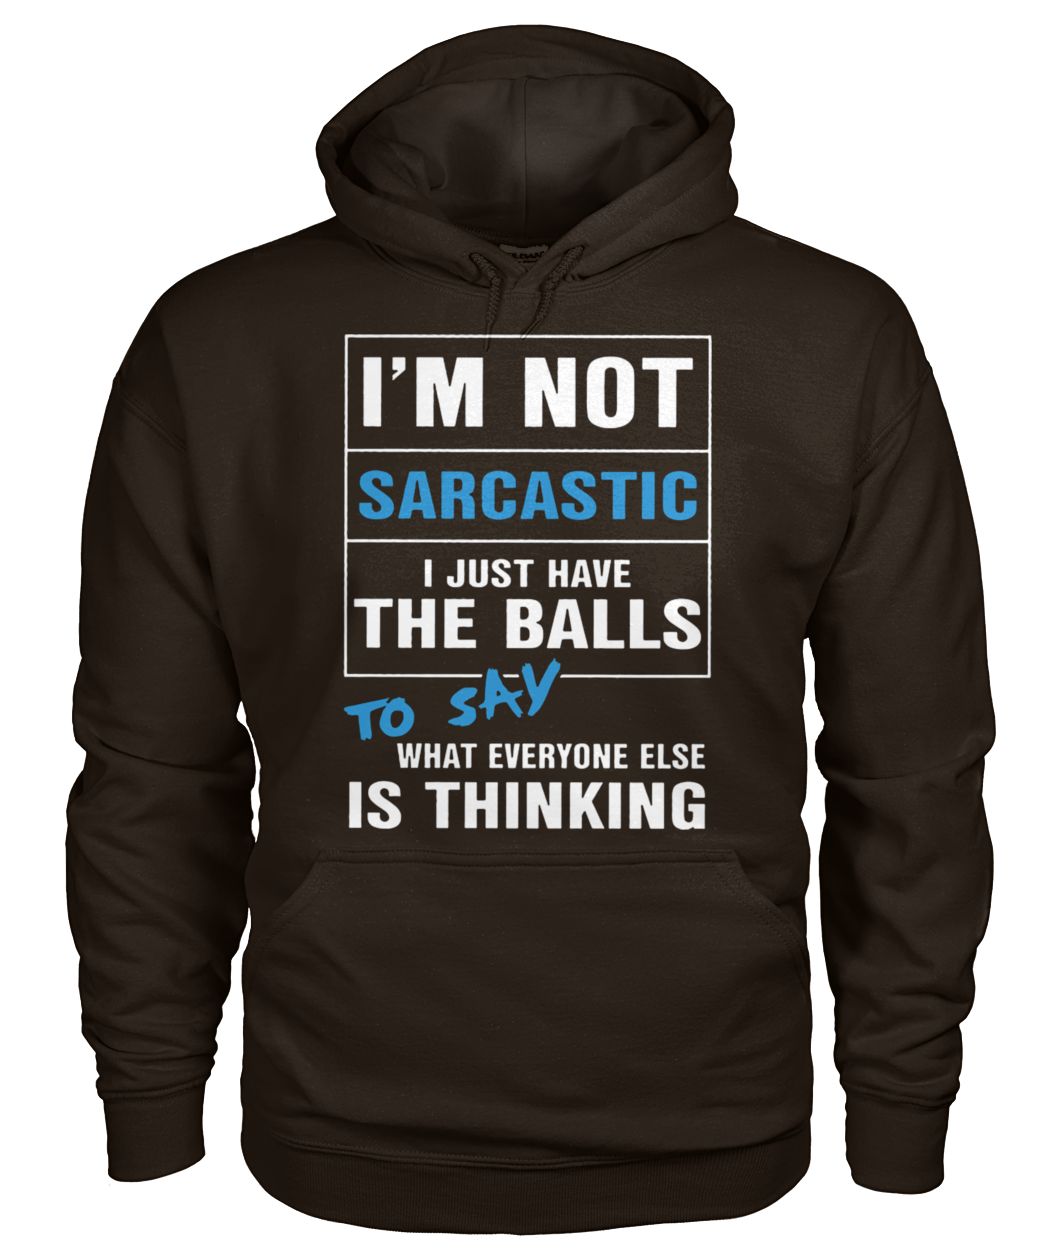 I’m not sarcastic I just have the balls to say what everyone else is thinking gildan hoodie